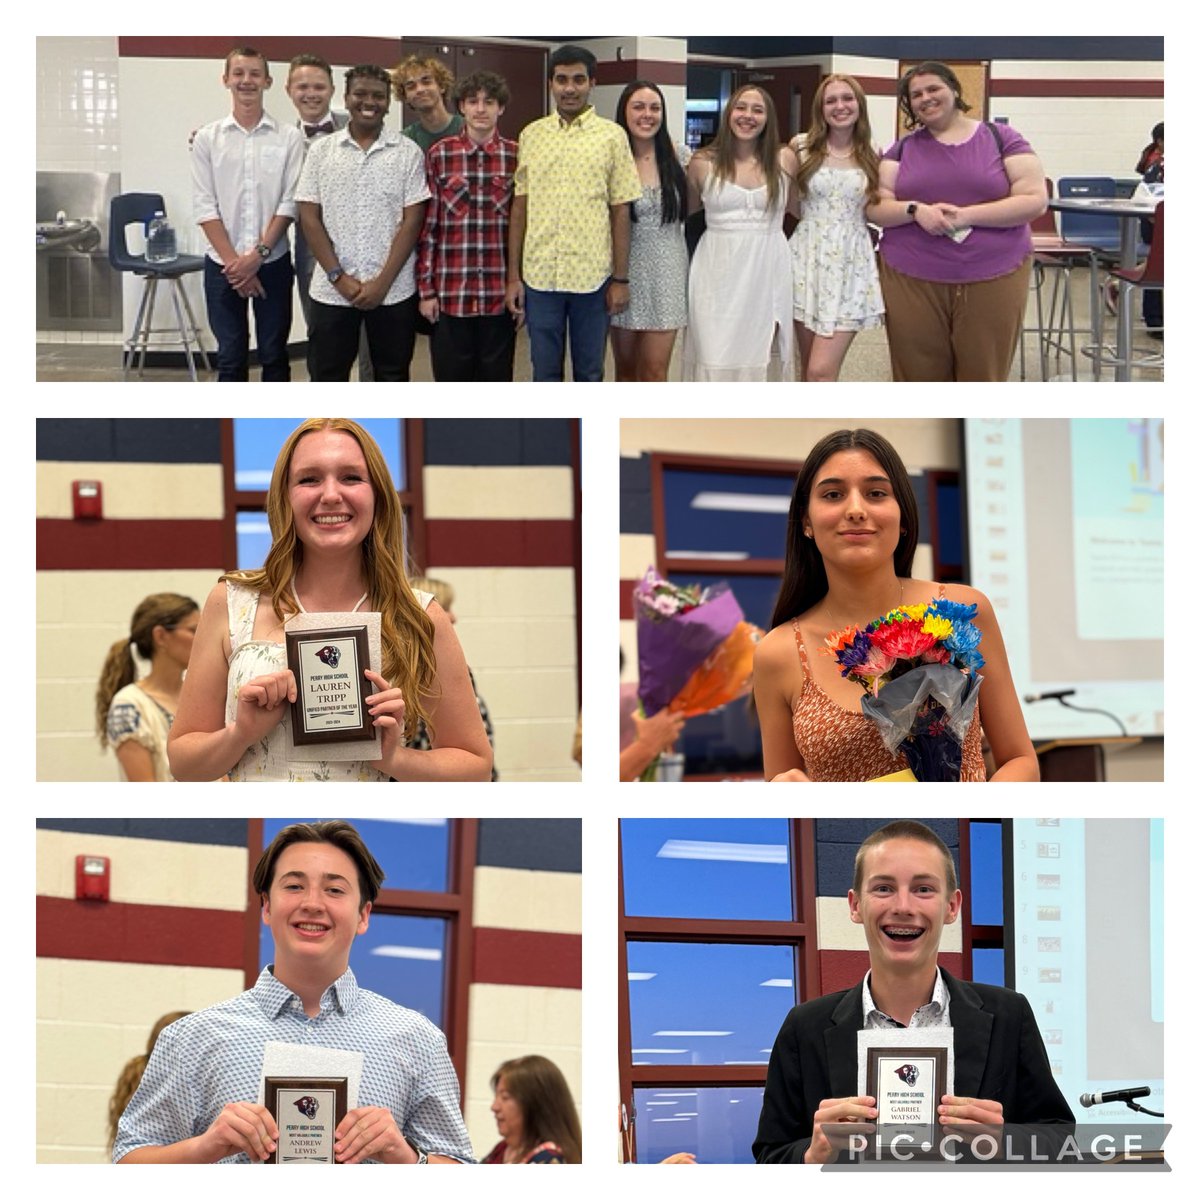 Perry Unified had their Awards & Banquet tonight. It’s an awesome feeling to see the excitement on their faces, including parents, knowing they earned their Varsity Letter. Congratulations! #ChooseToInclude #Unified @perry_pumas @PerryPumas07 @CUSDAthletics @ChandlerUnified